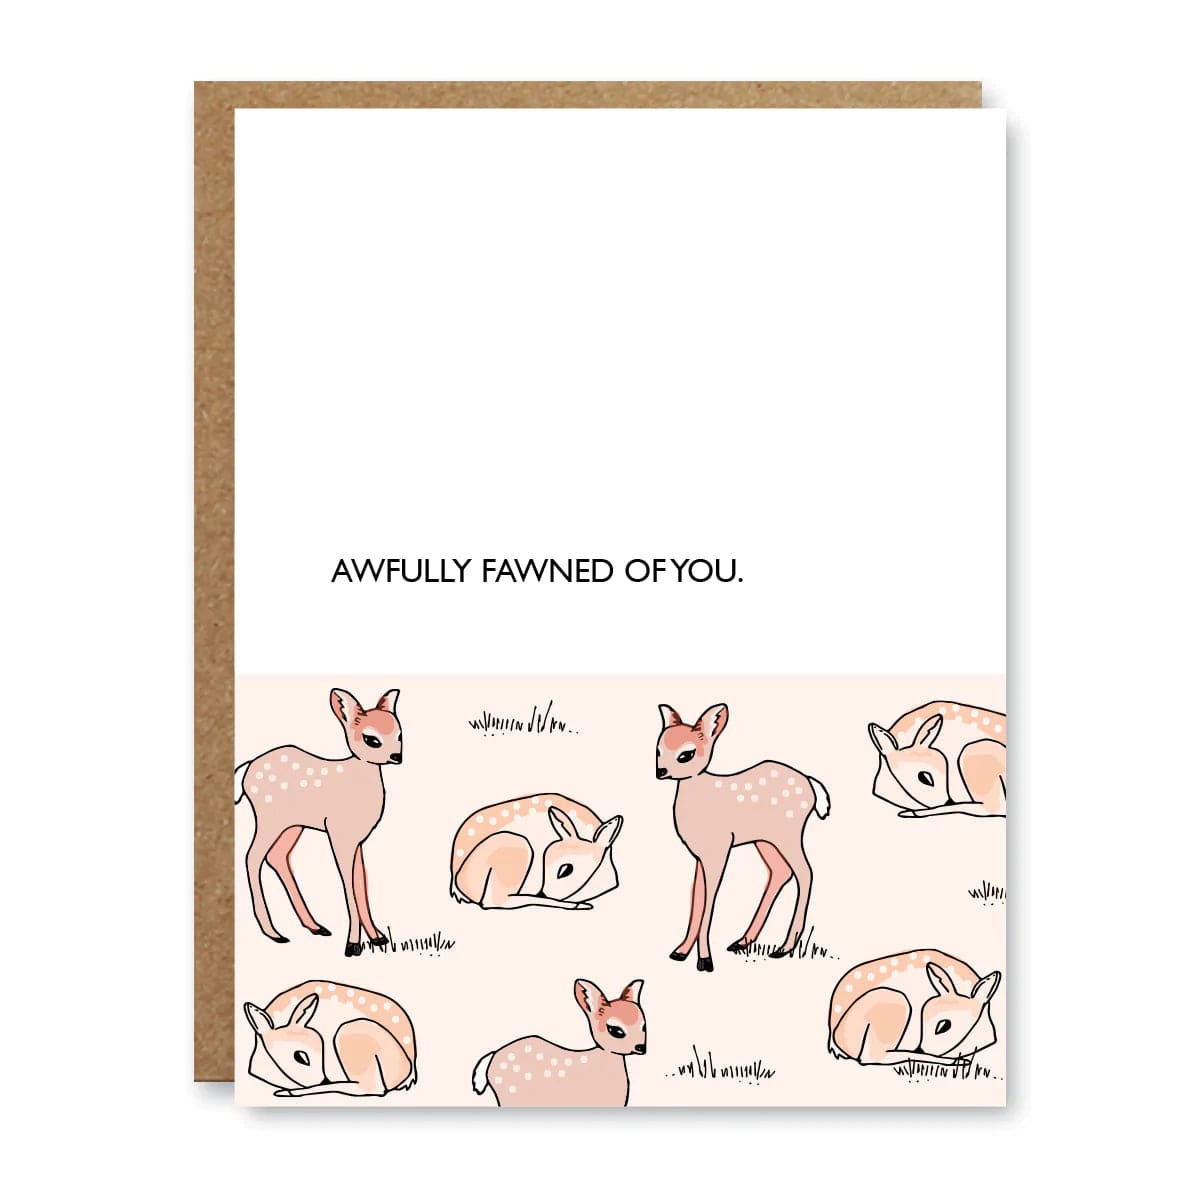 Boo To You Greeting Cards greeting card Boo To You 'Fawned Of You' Greeting Card